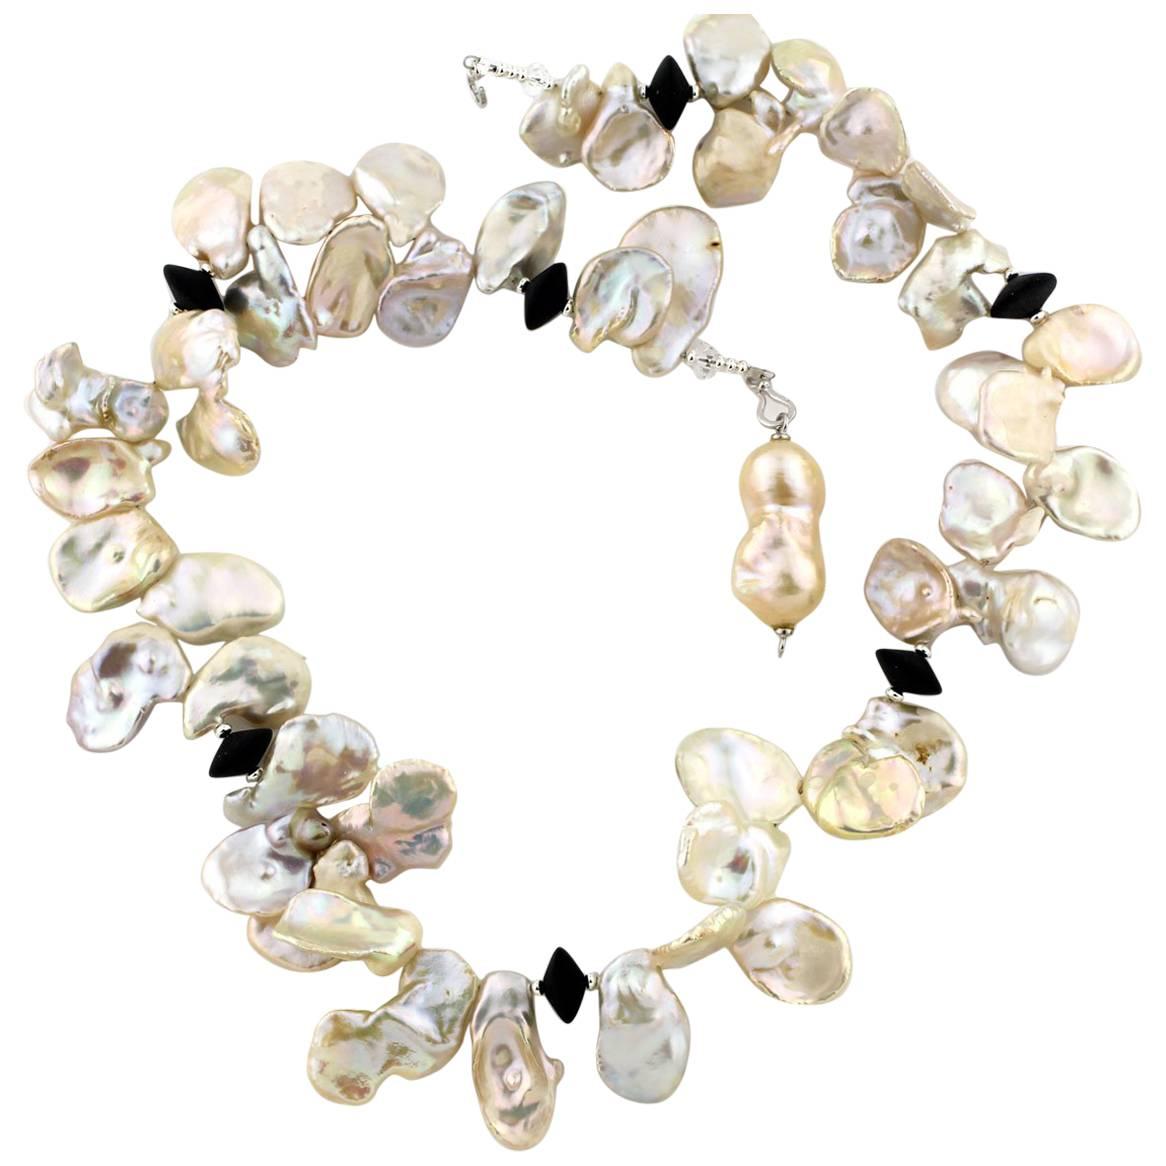 AJD Dramatic Floppy Leaves of Keshi Cream/White Pearl Necklace